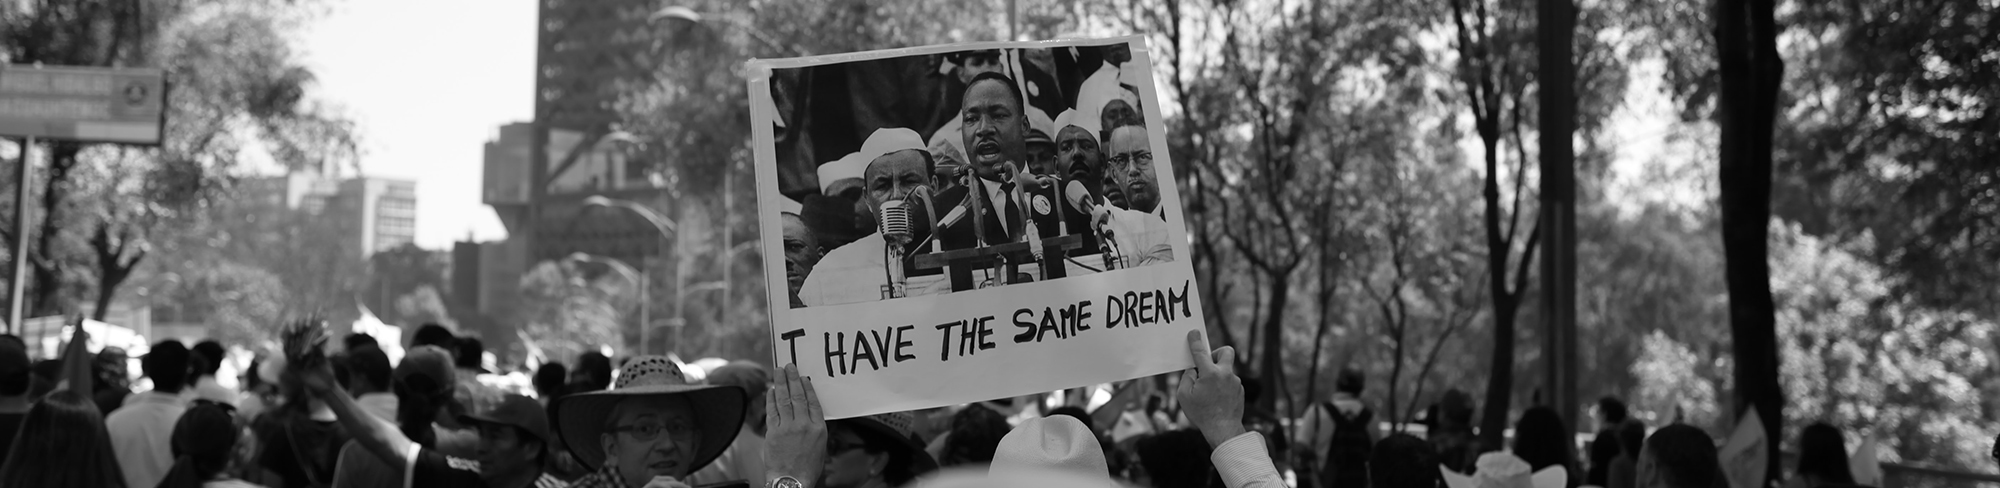 Image of protestors in a crowded street holding a sign with a photo of Martin Luther King, Jr., saying, "I have the same dream."